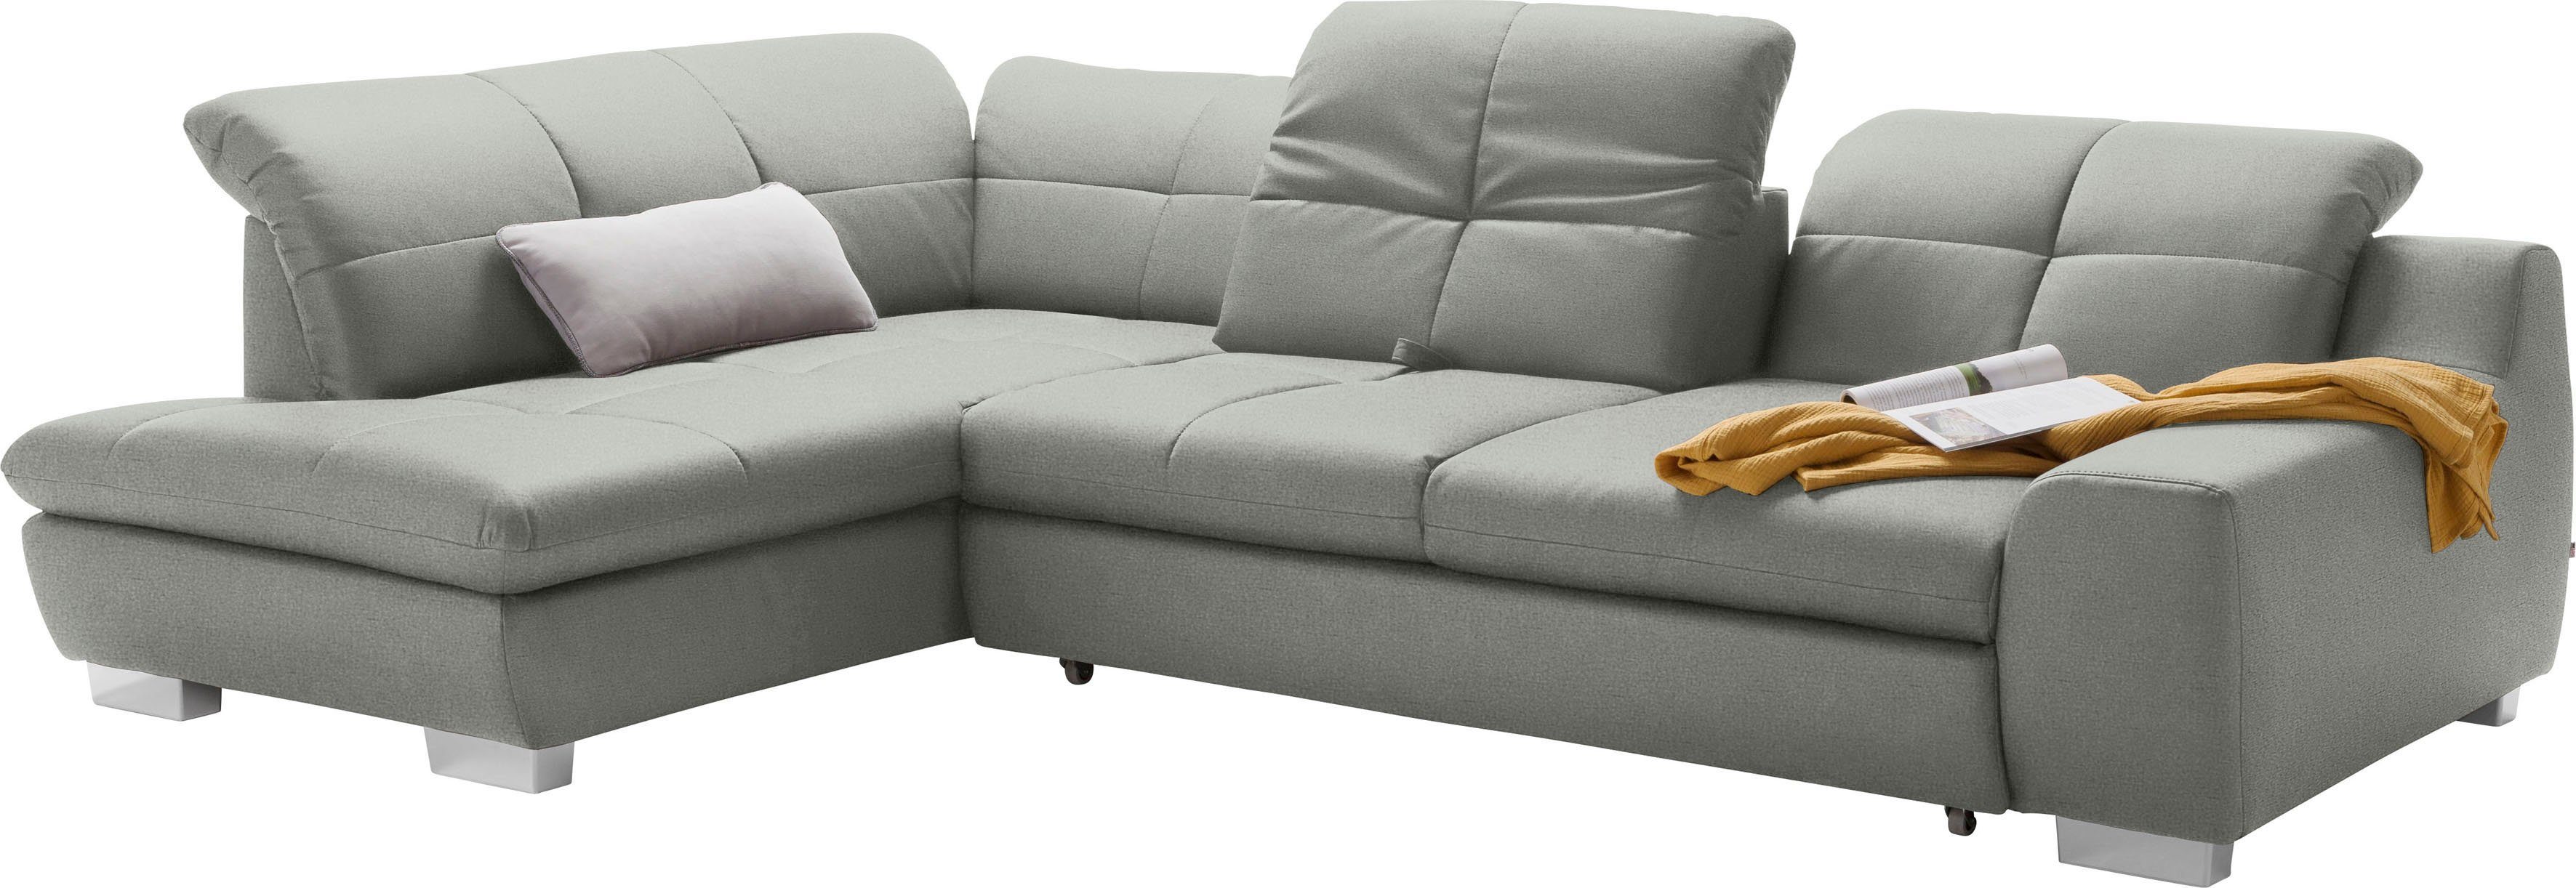 SO mit Musterring one set 1200, Ecksofa Bettfunktion by wahlweise